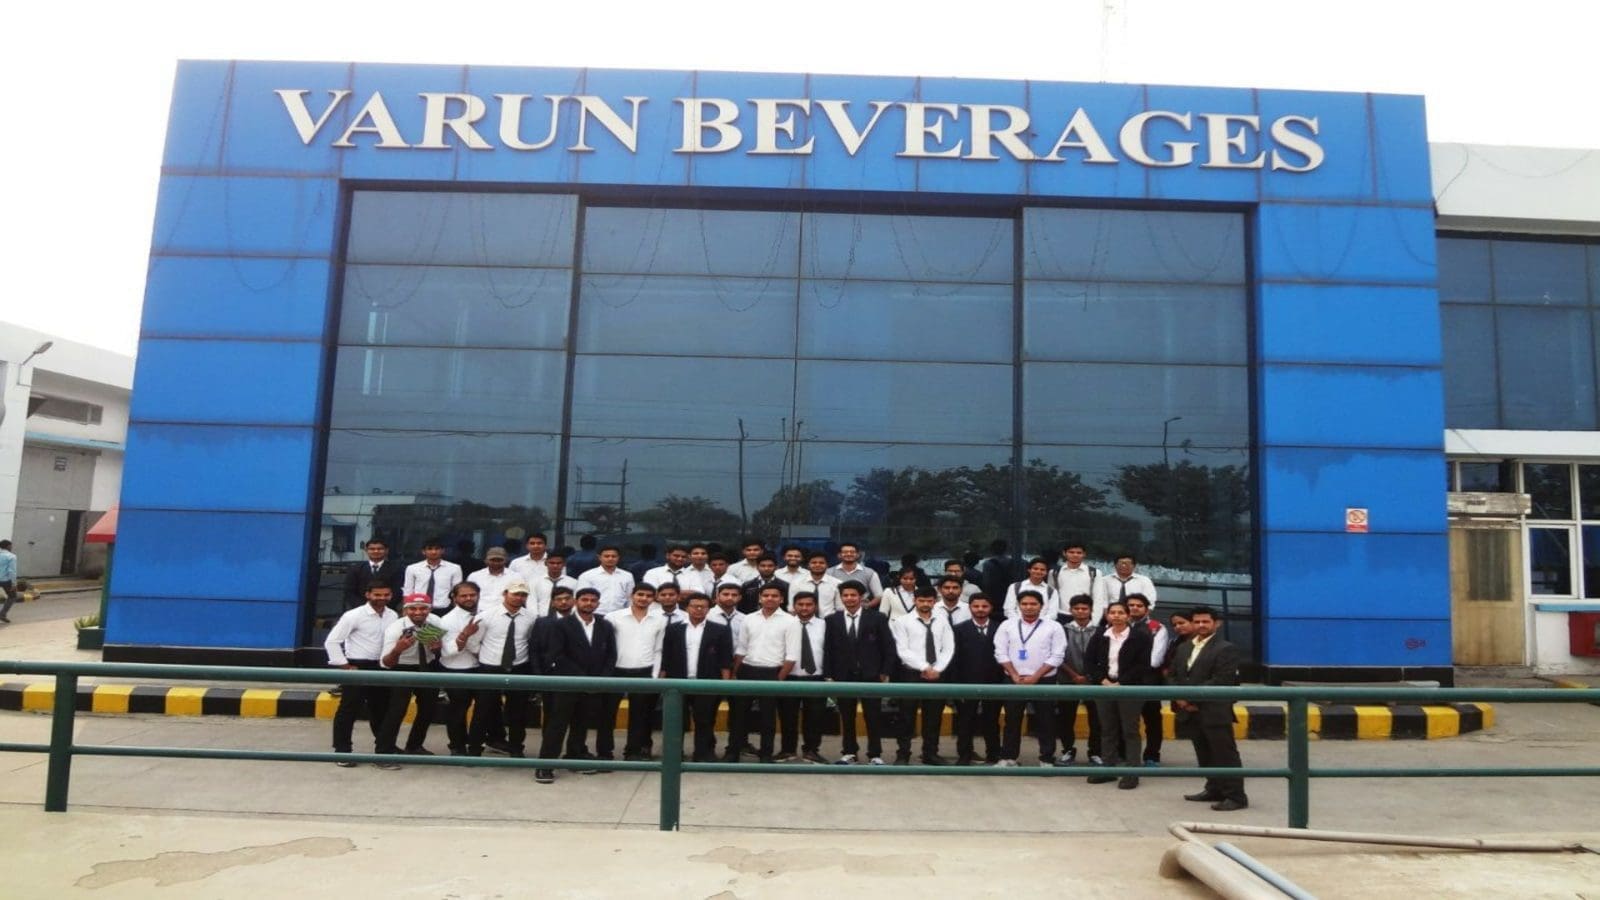 PepsiCo’s Indian arm Varun Beverage invests heavily in new plants to increase production capabilities